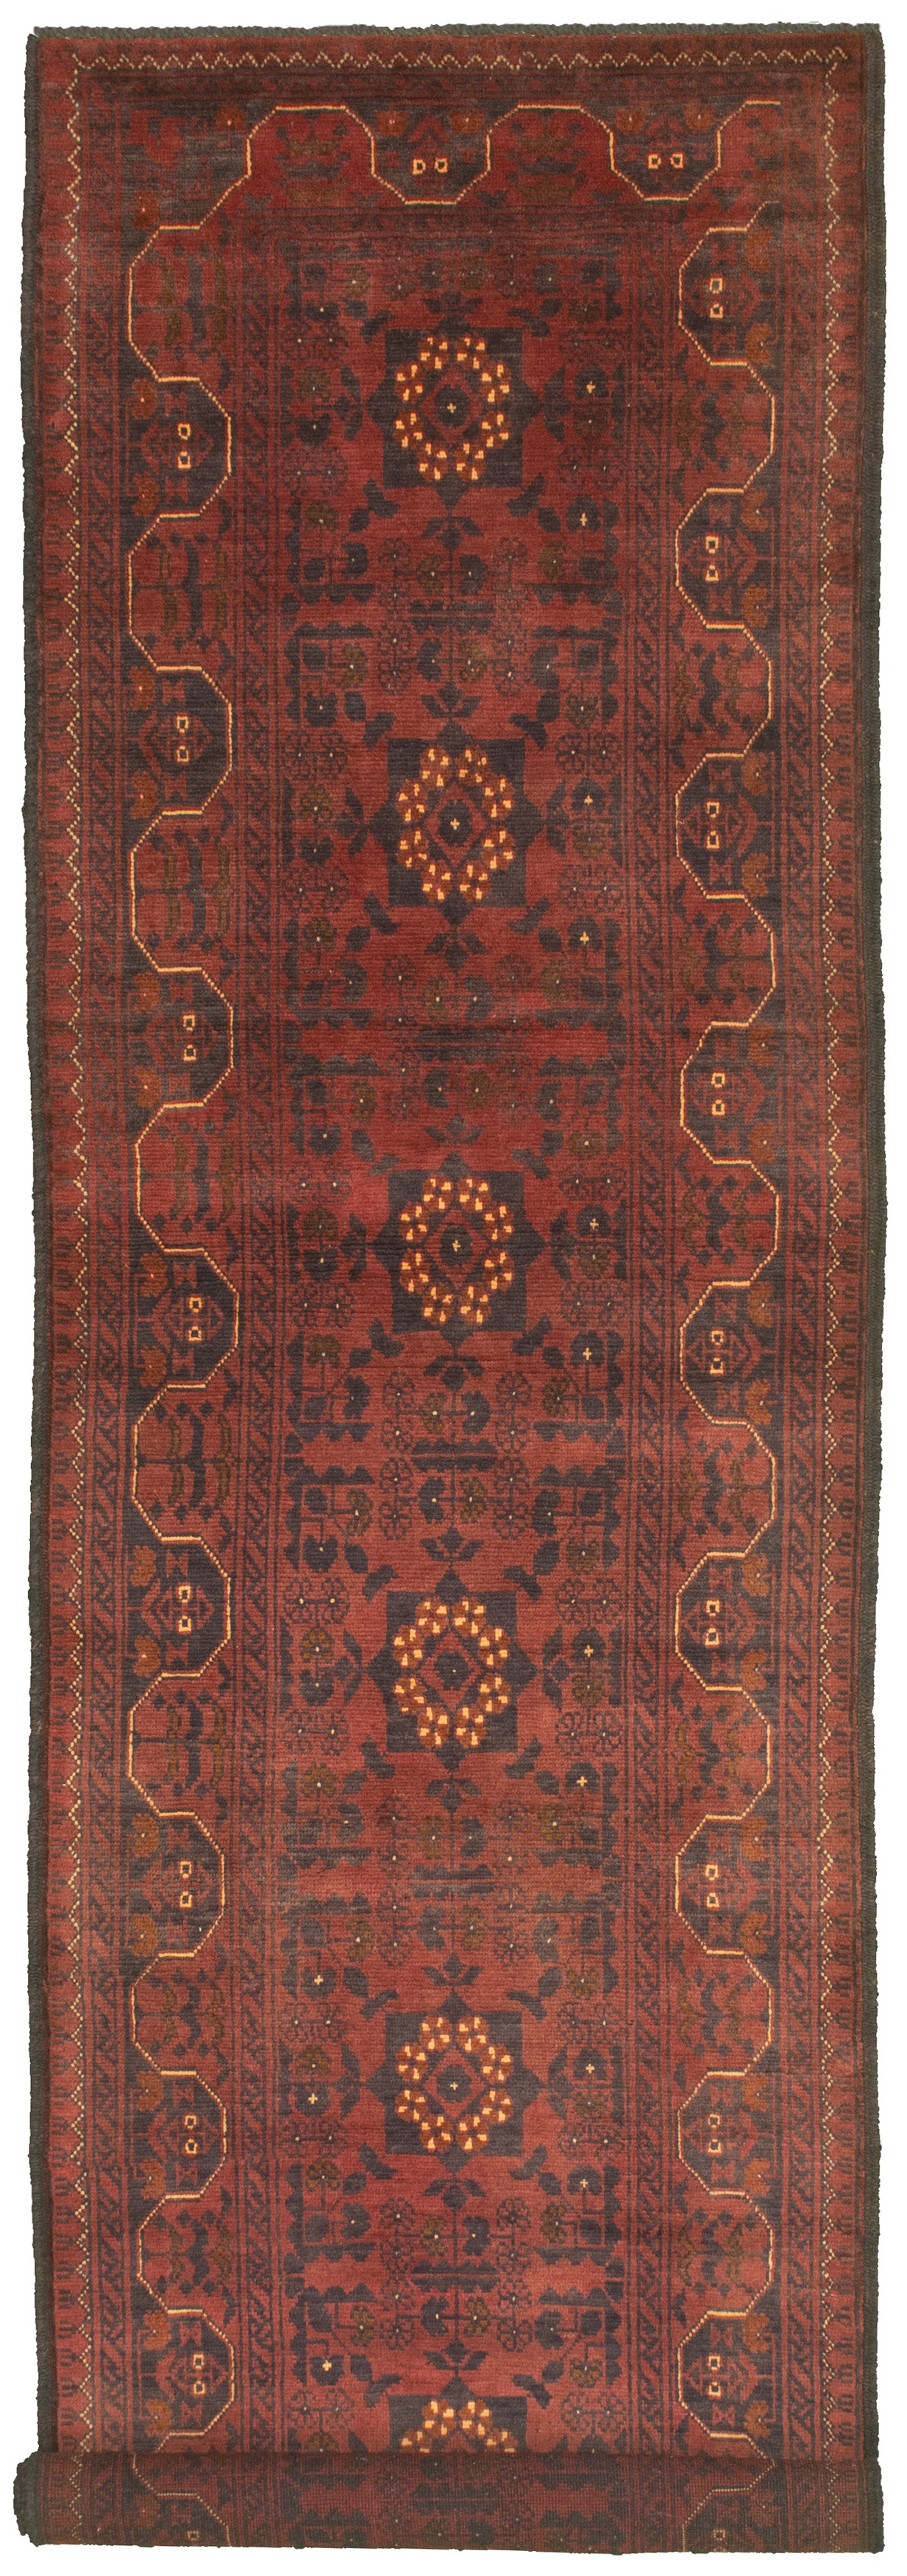 Hand-knotted Finest Khal Mohammadi Dark Red  Rug 2'10" x 12'10" Size: 2'10" x 12'10"  